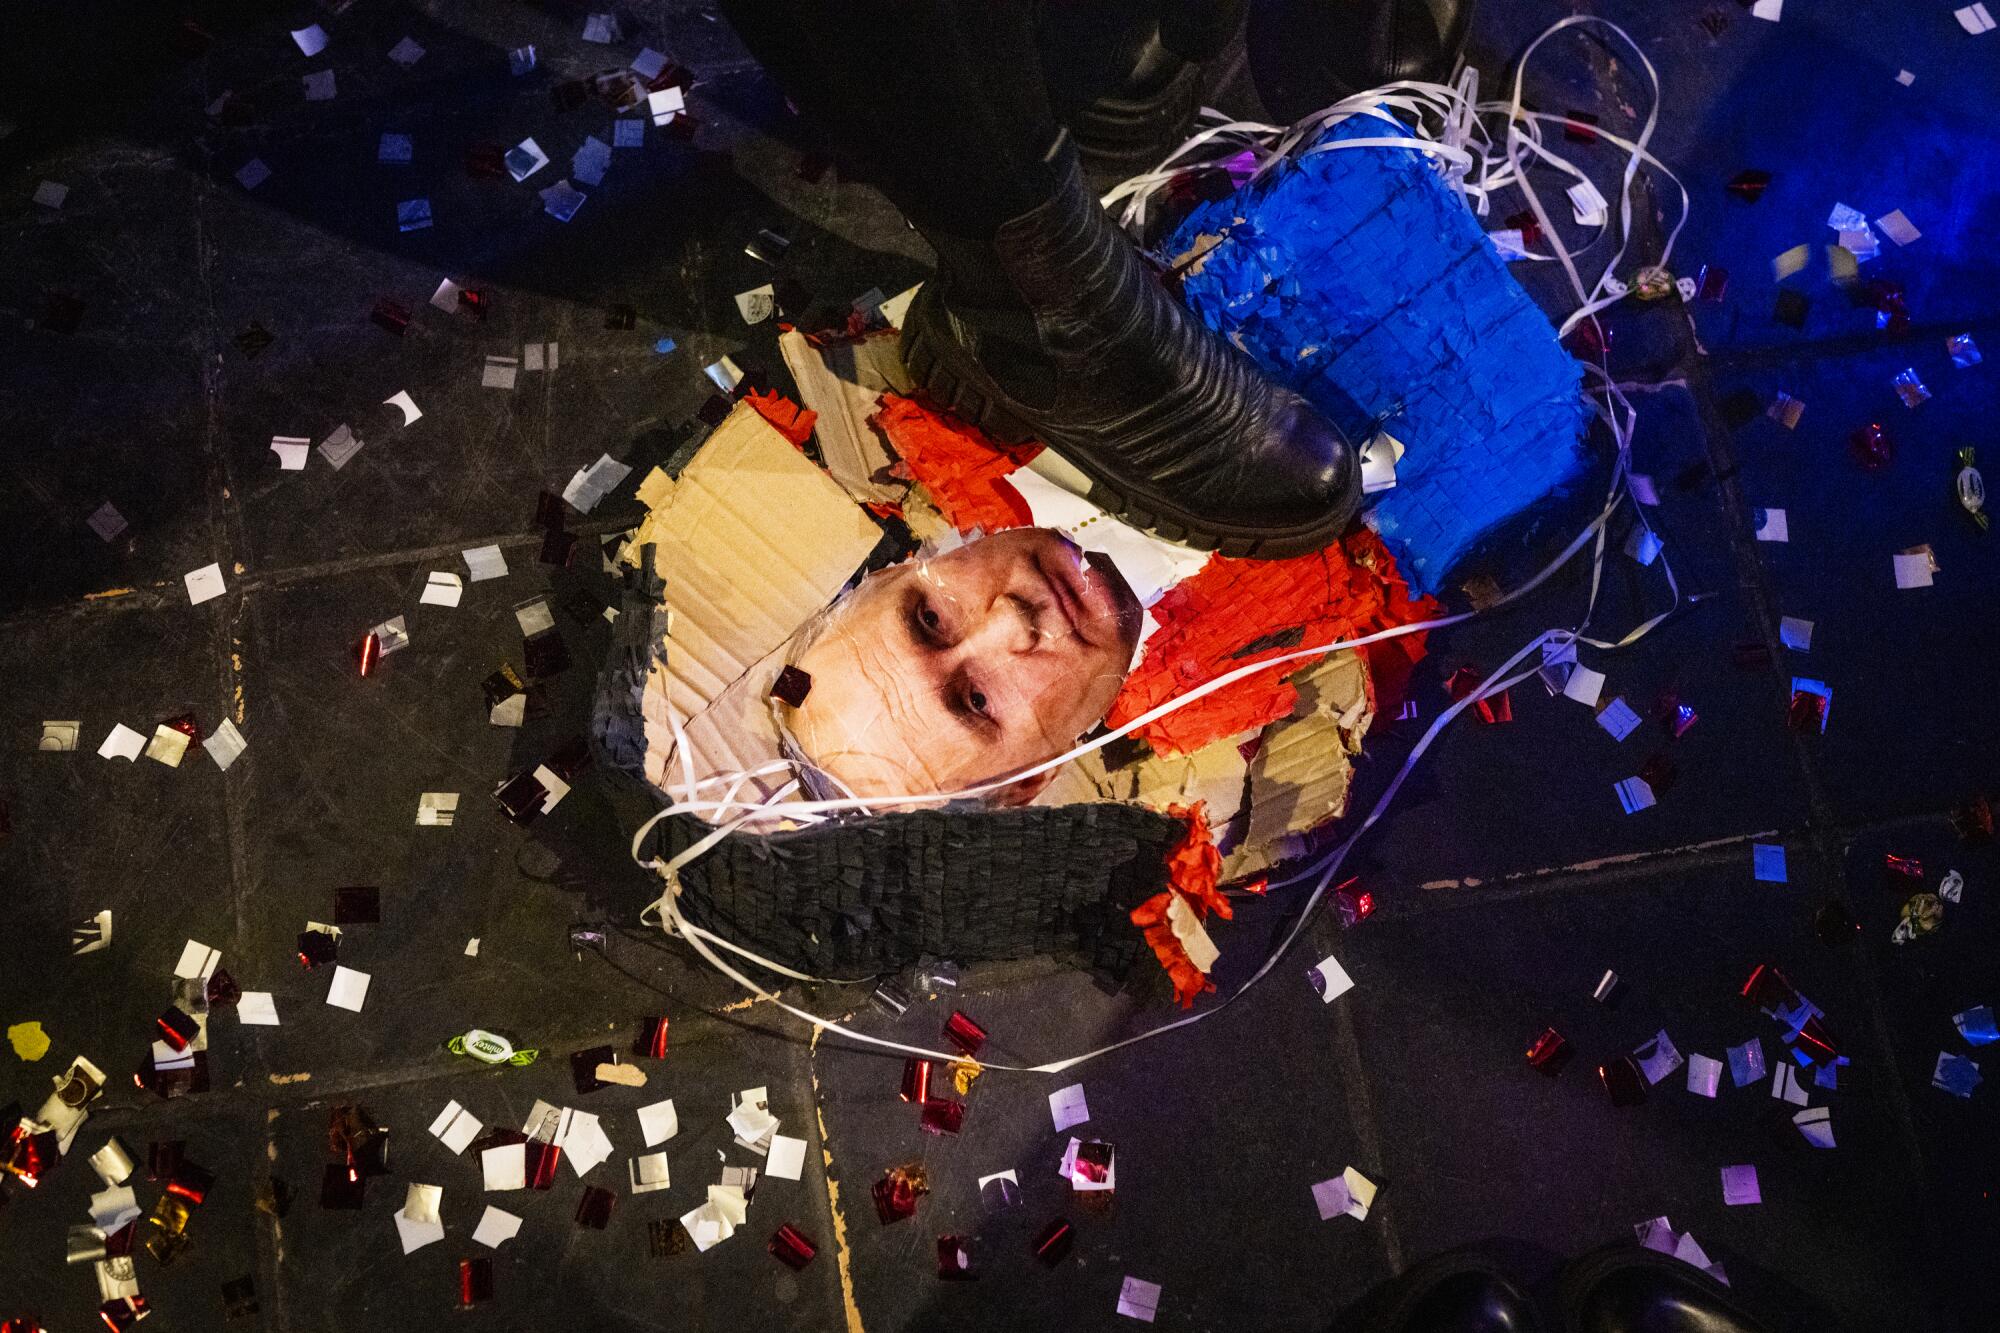 A smashed pi?ata featuring the face of Vladimir Putin on the floor of a bar 